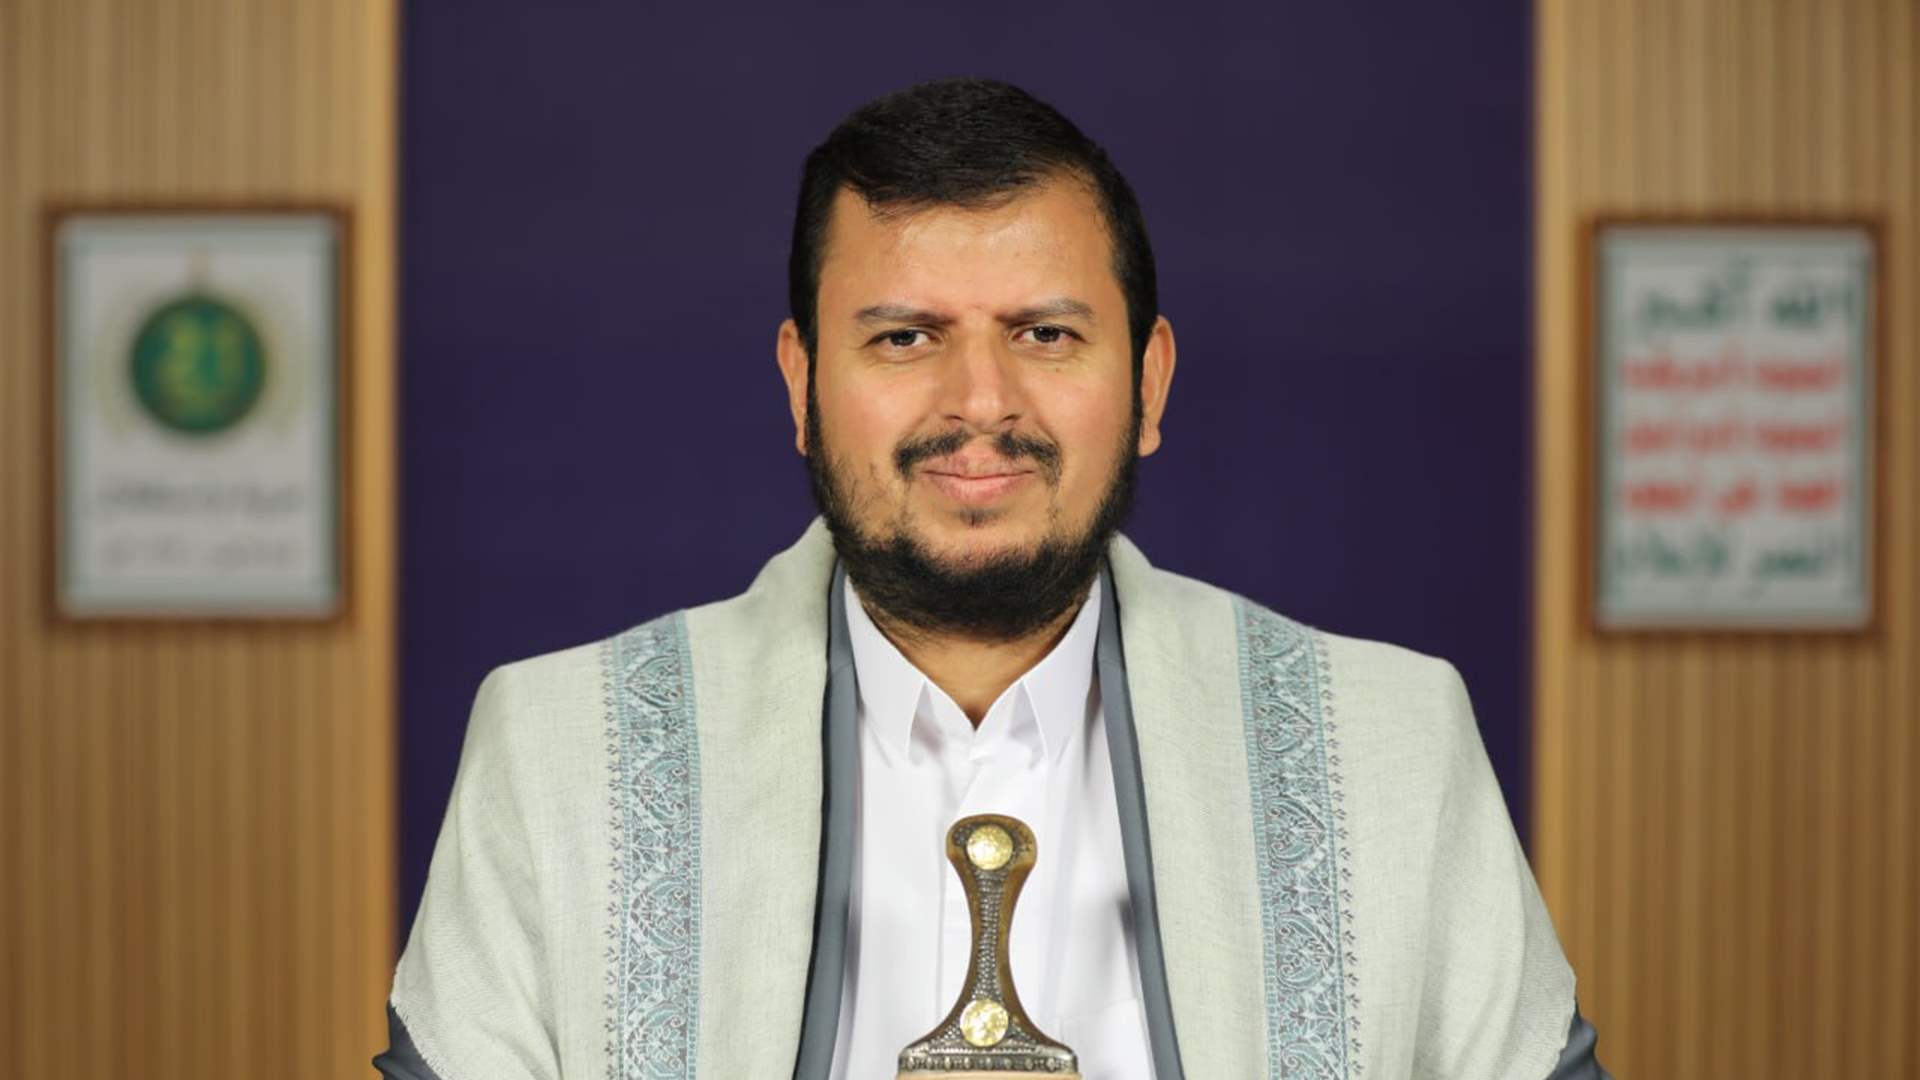 Houthi leader: Attacks on Israel will continue and will not be deterred by airstrikes